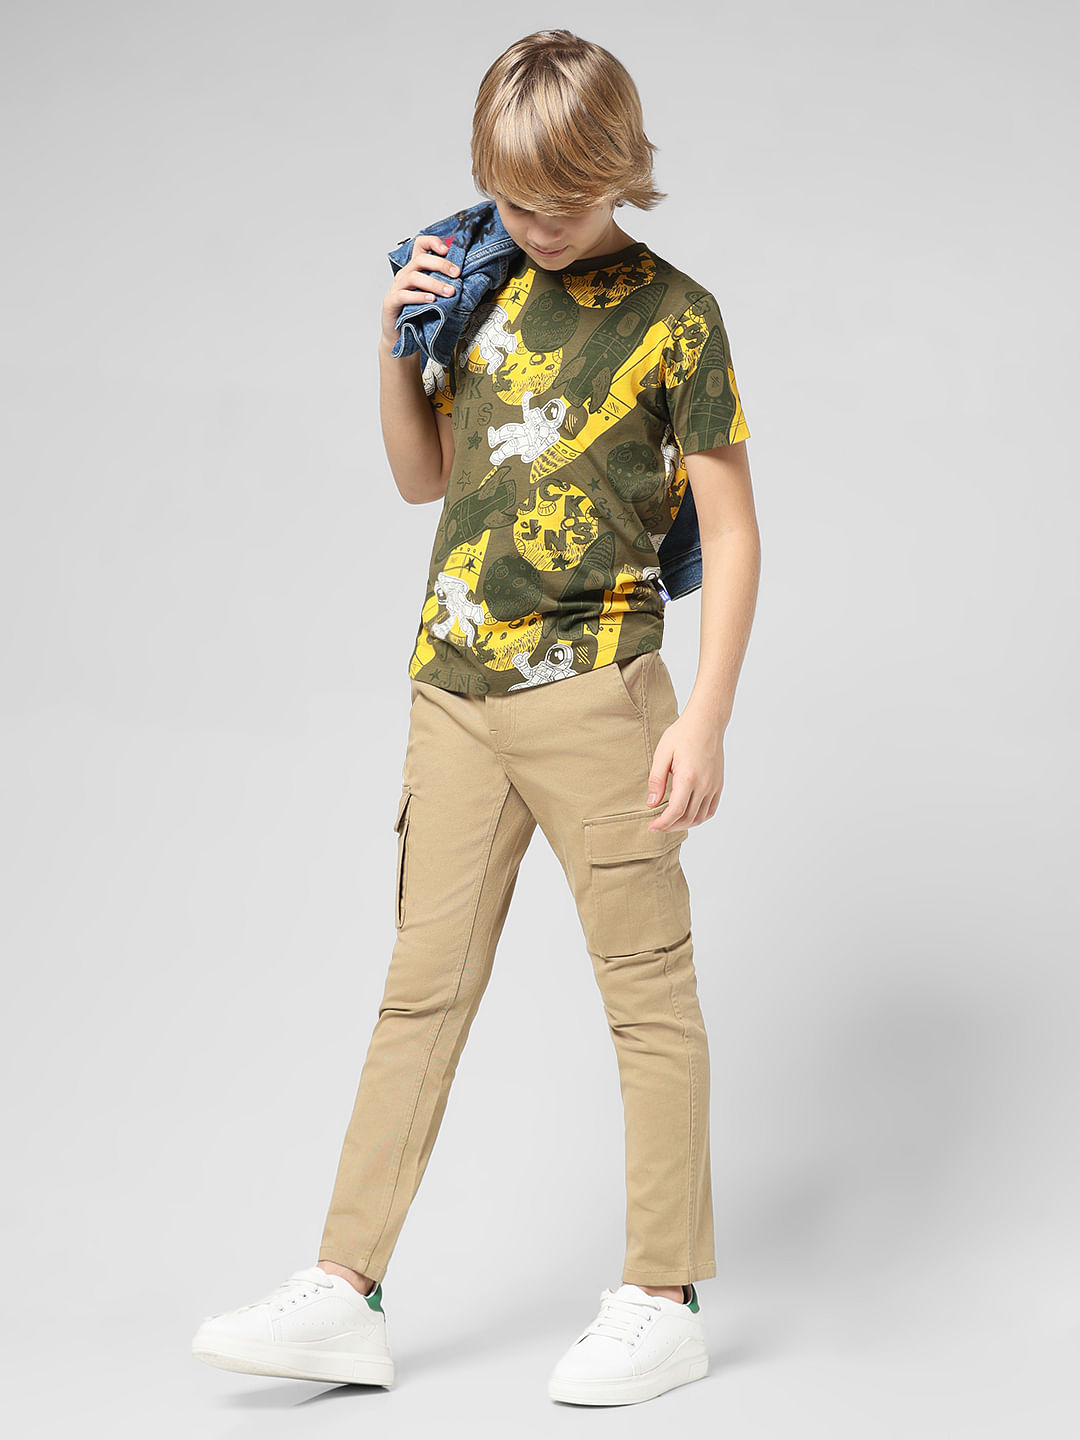 Boys Solid Cotton Brown Smart Chino Pants